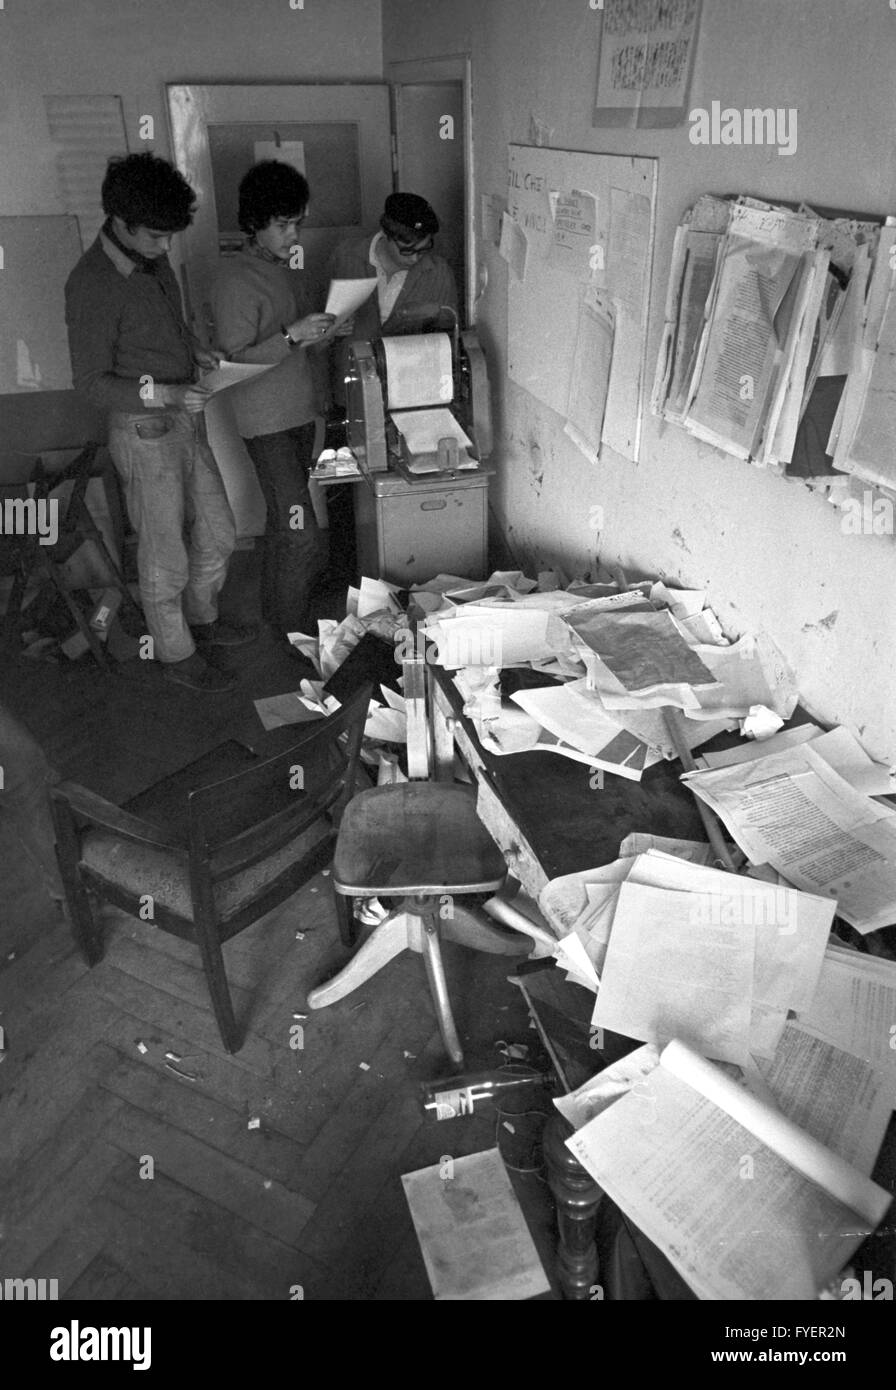 View of the SDS office, pictured during the preparations for actions against the emergency law in Frankfurt am Main on 13 May 1968. Stock Photo